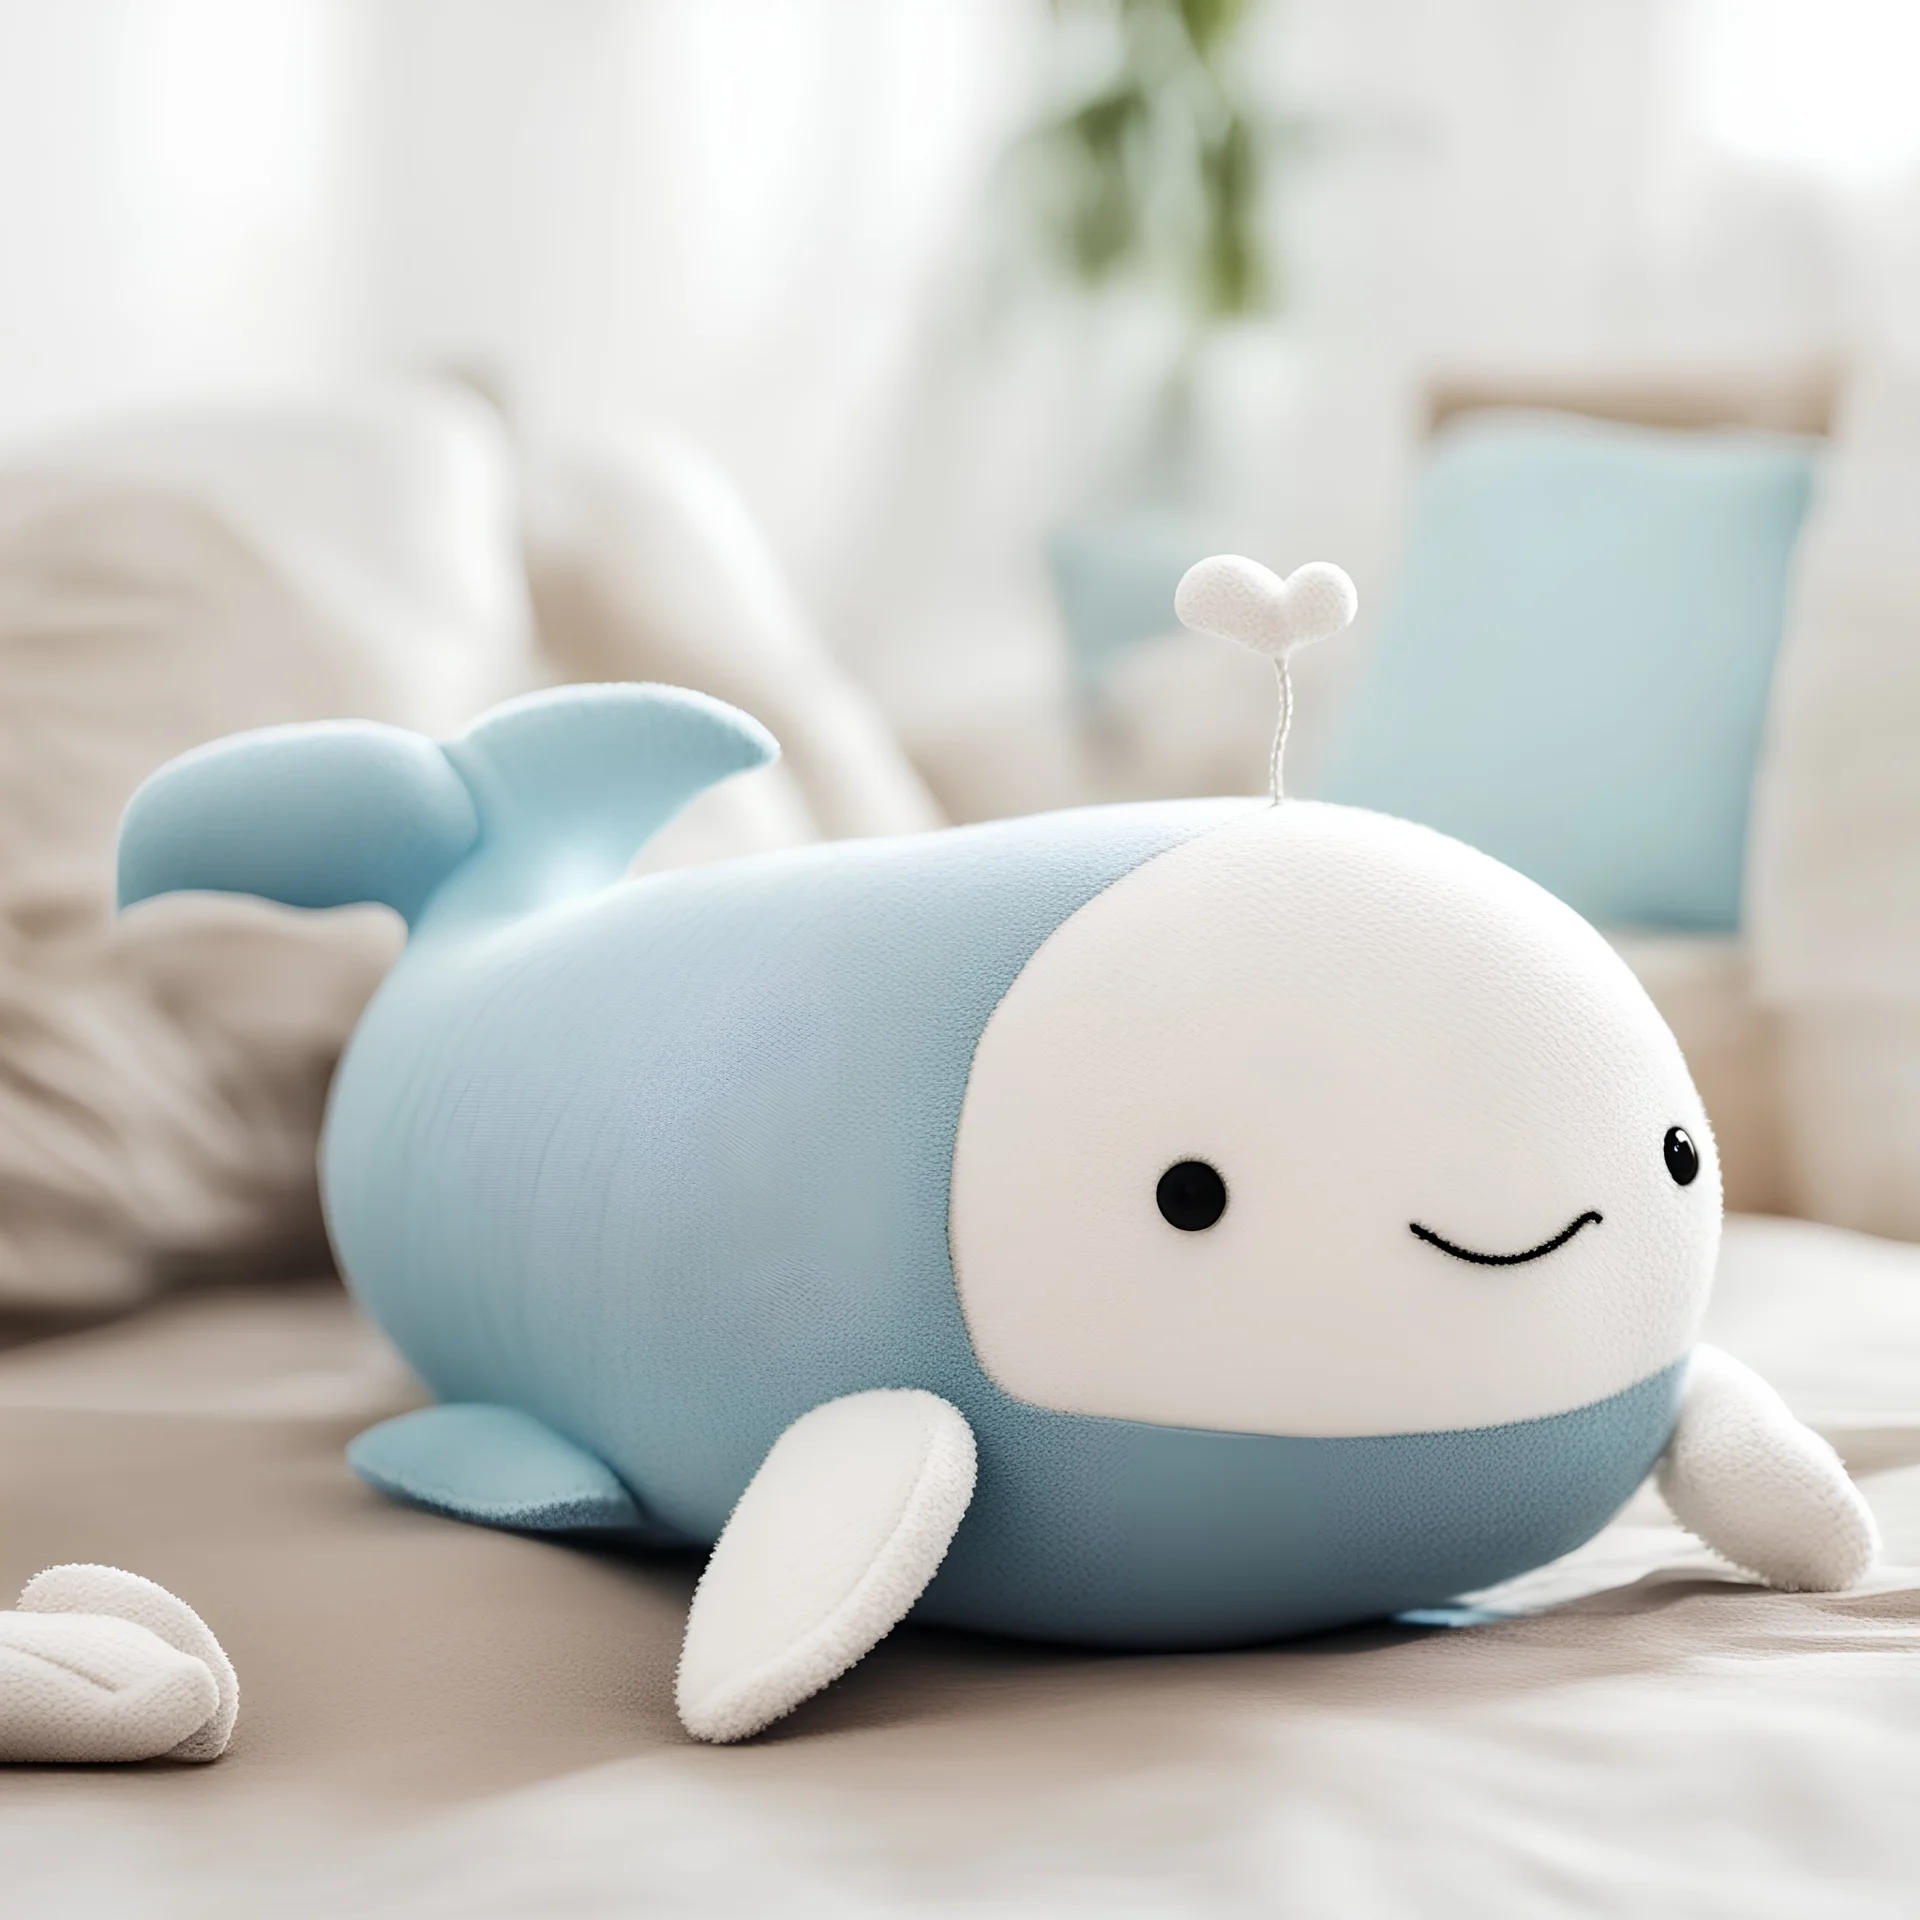 cute whale toy on a bed